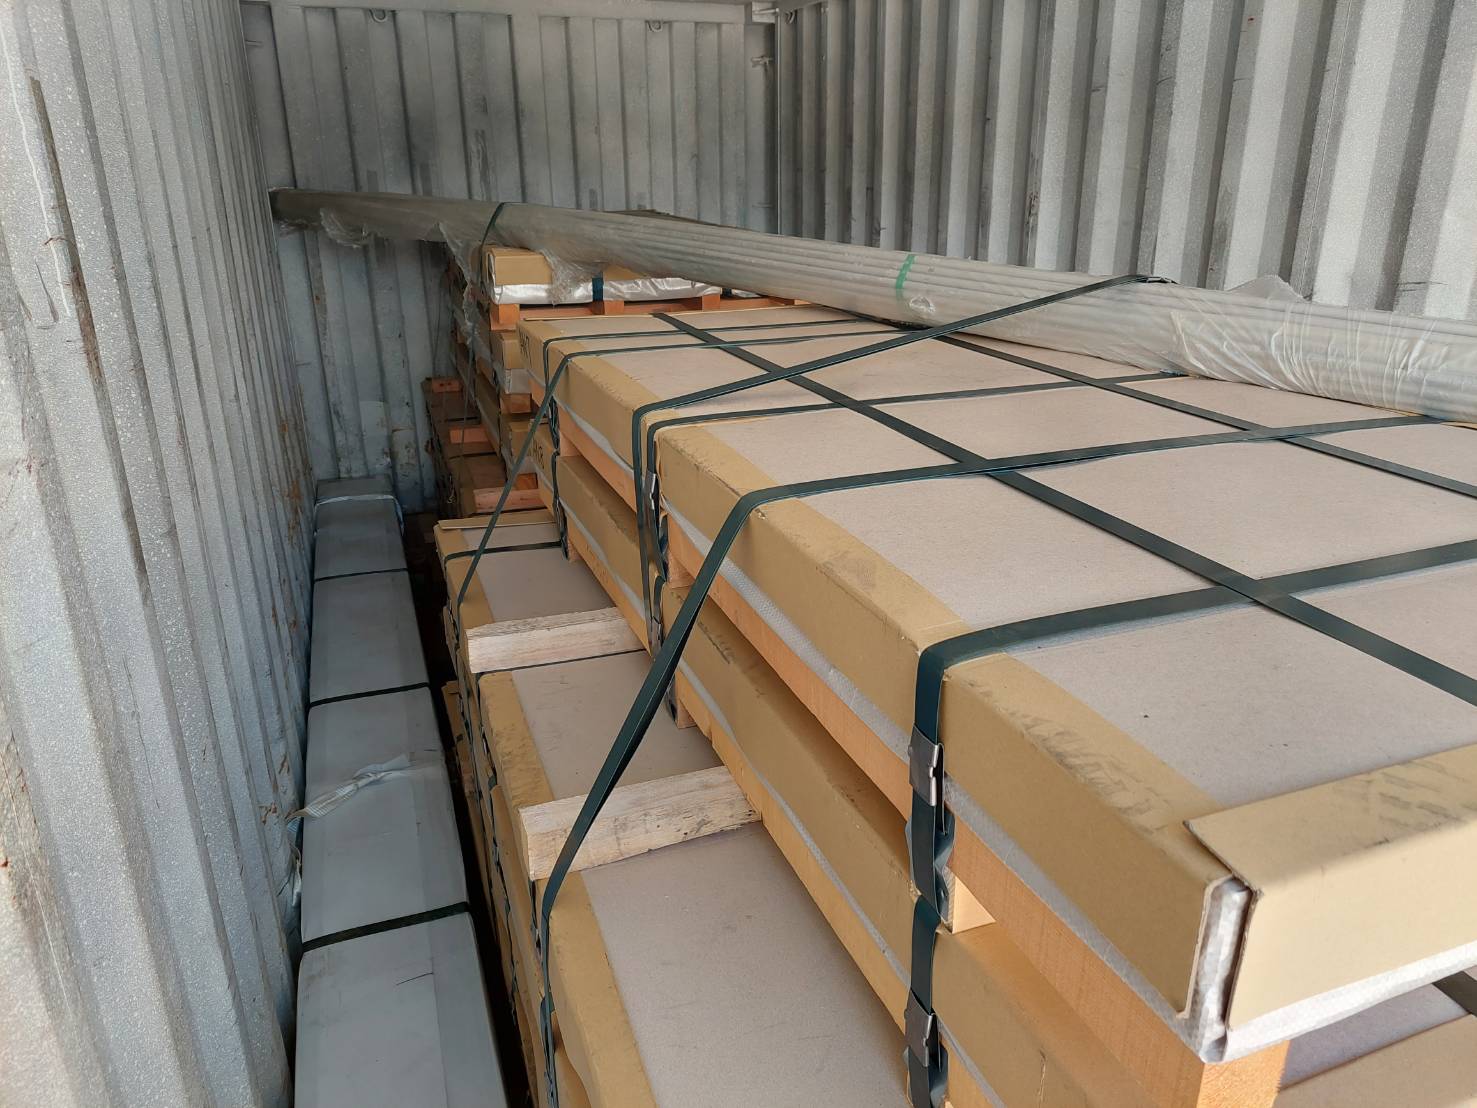 container loading with tubes and sheets